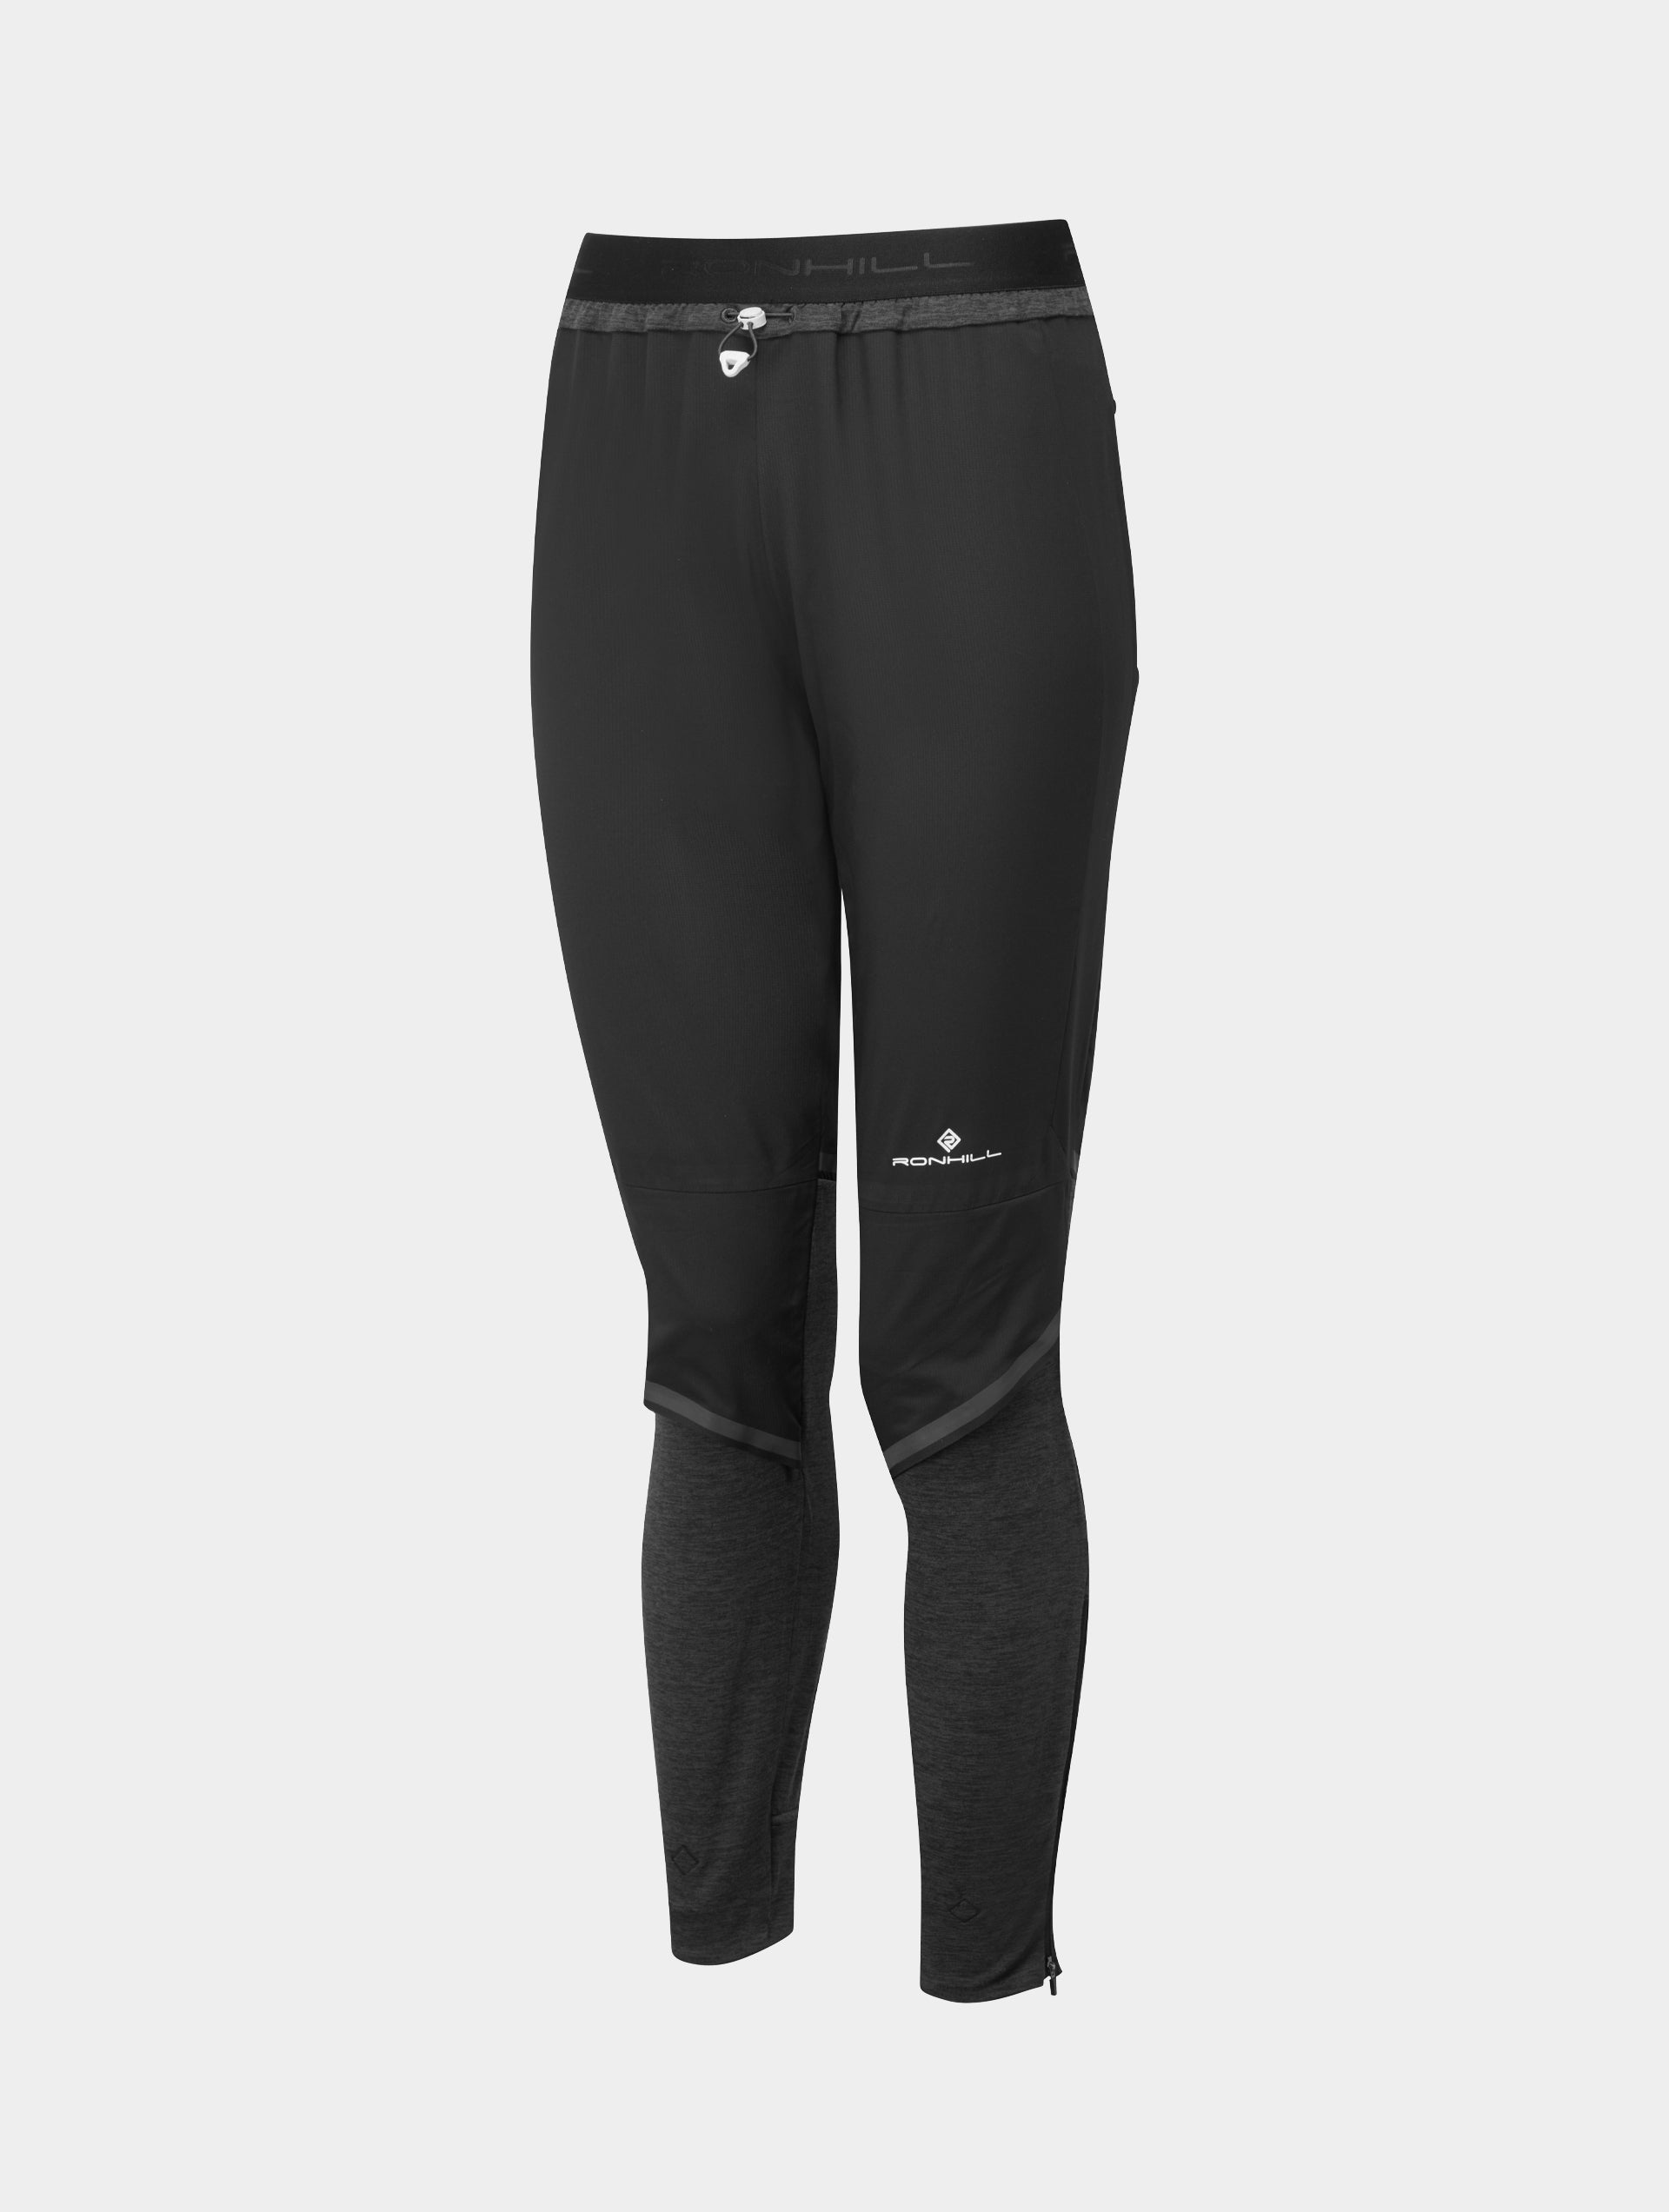 Ronhill Tech Winter Womens Thermal Running Tights All Black